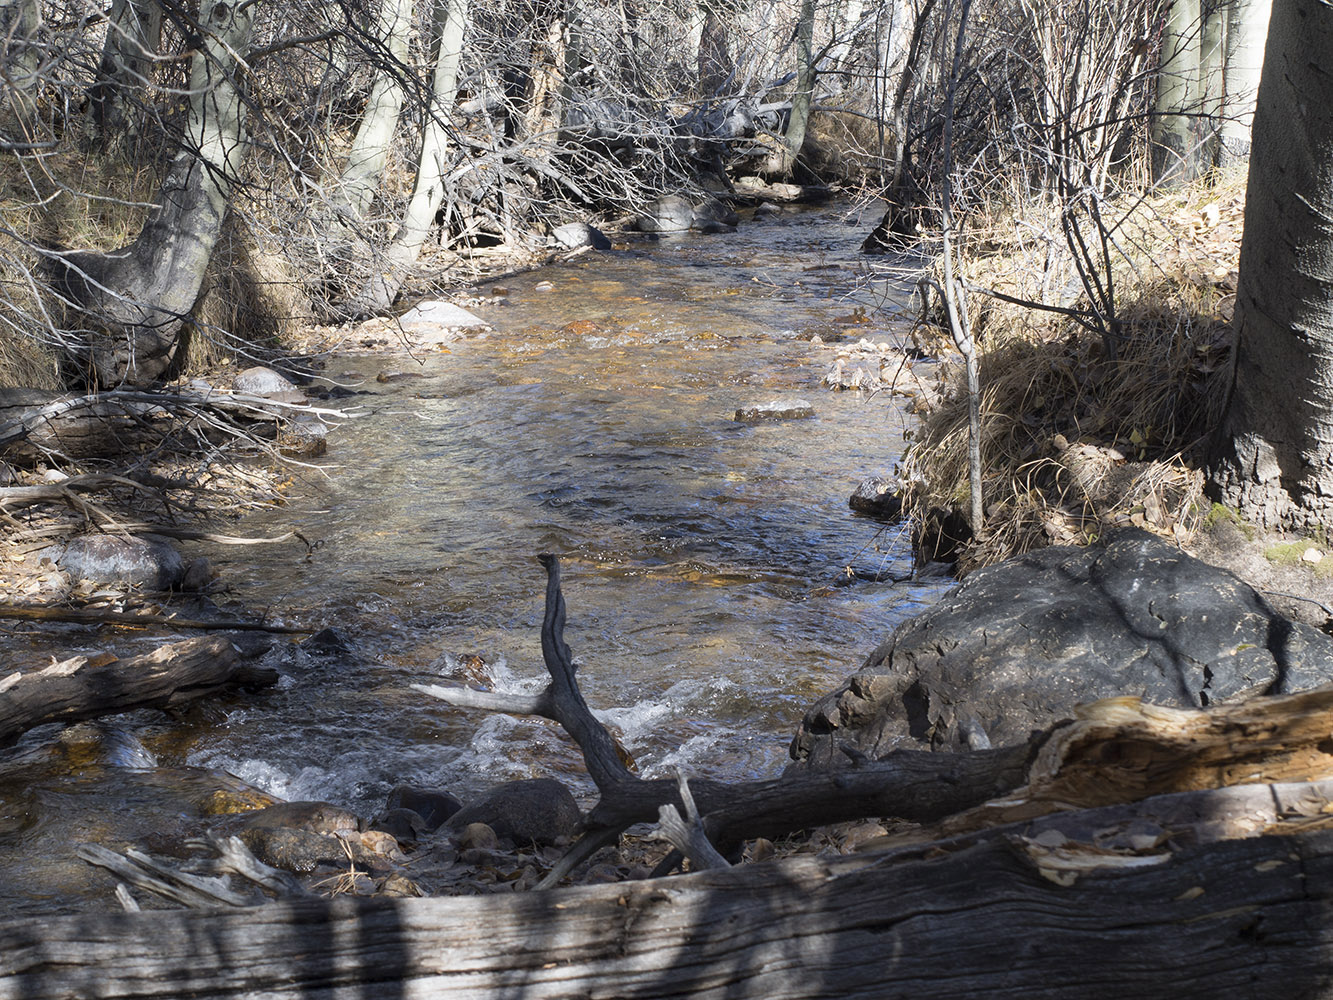 Parker Creek in Winter:  This small creek was great for trout fishing in the 50's and 60's.  I have fond memories of fishing with my family as a boy along this Creek.